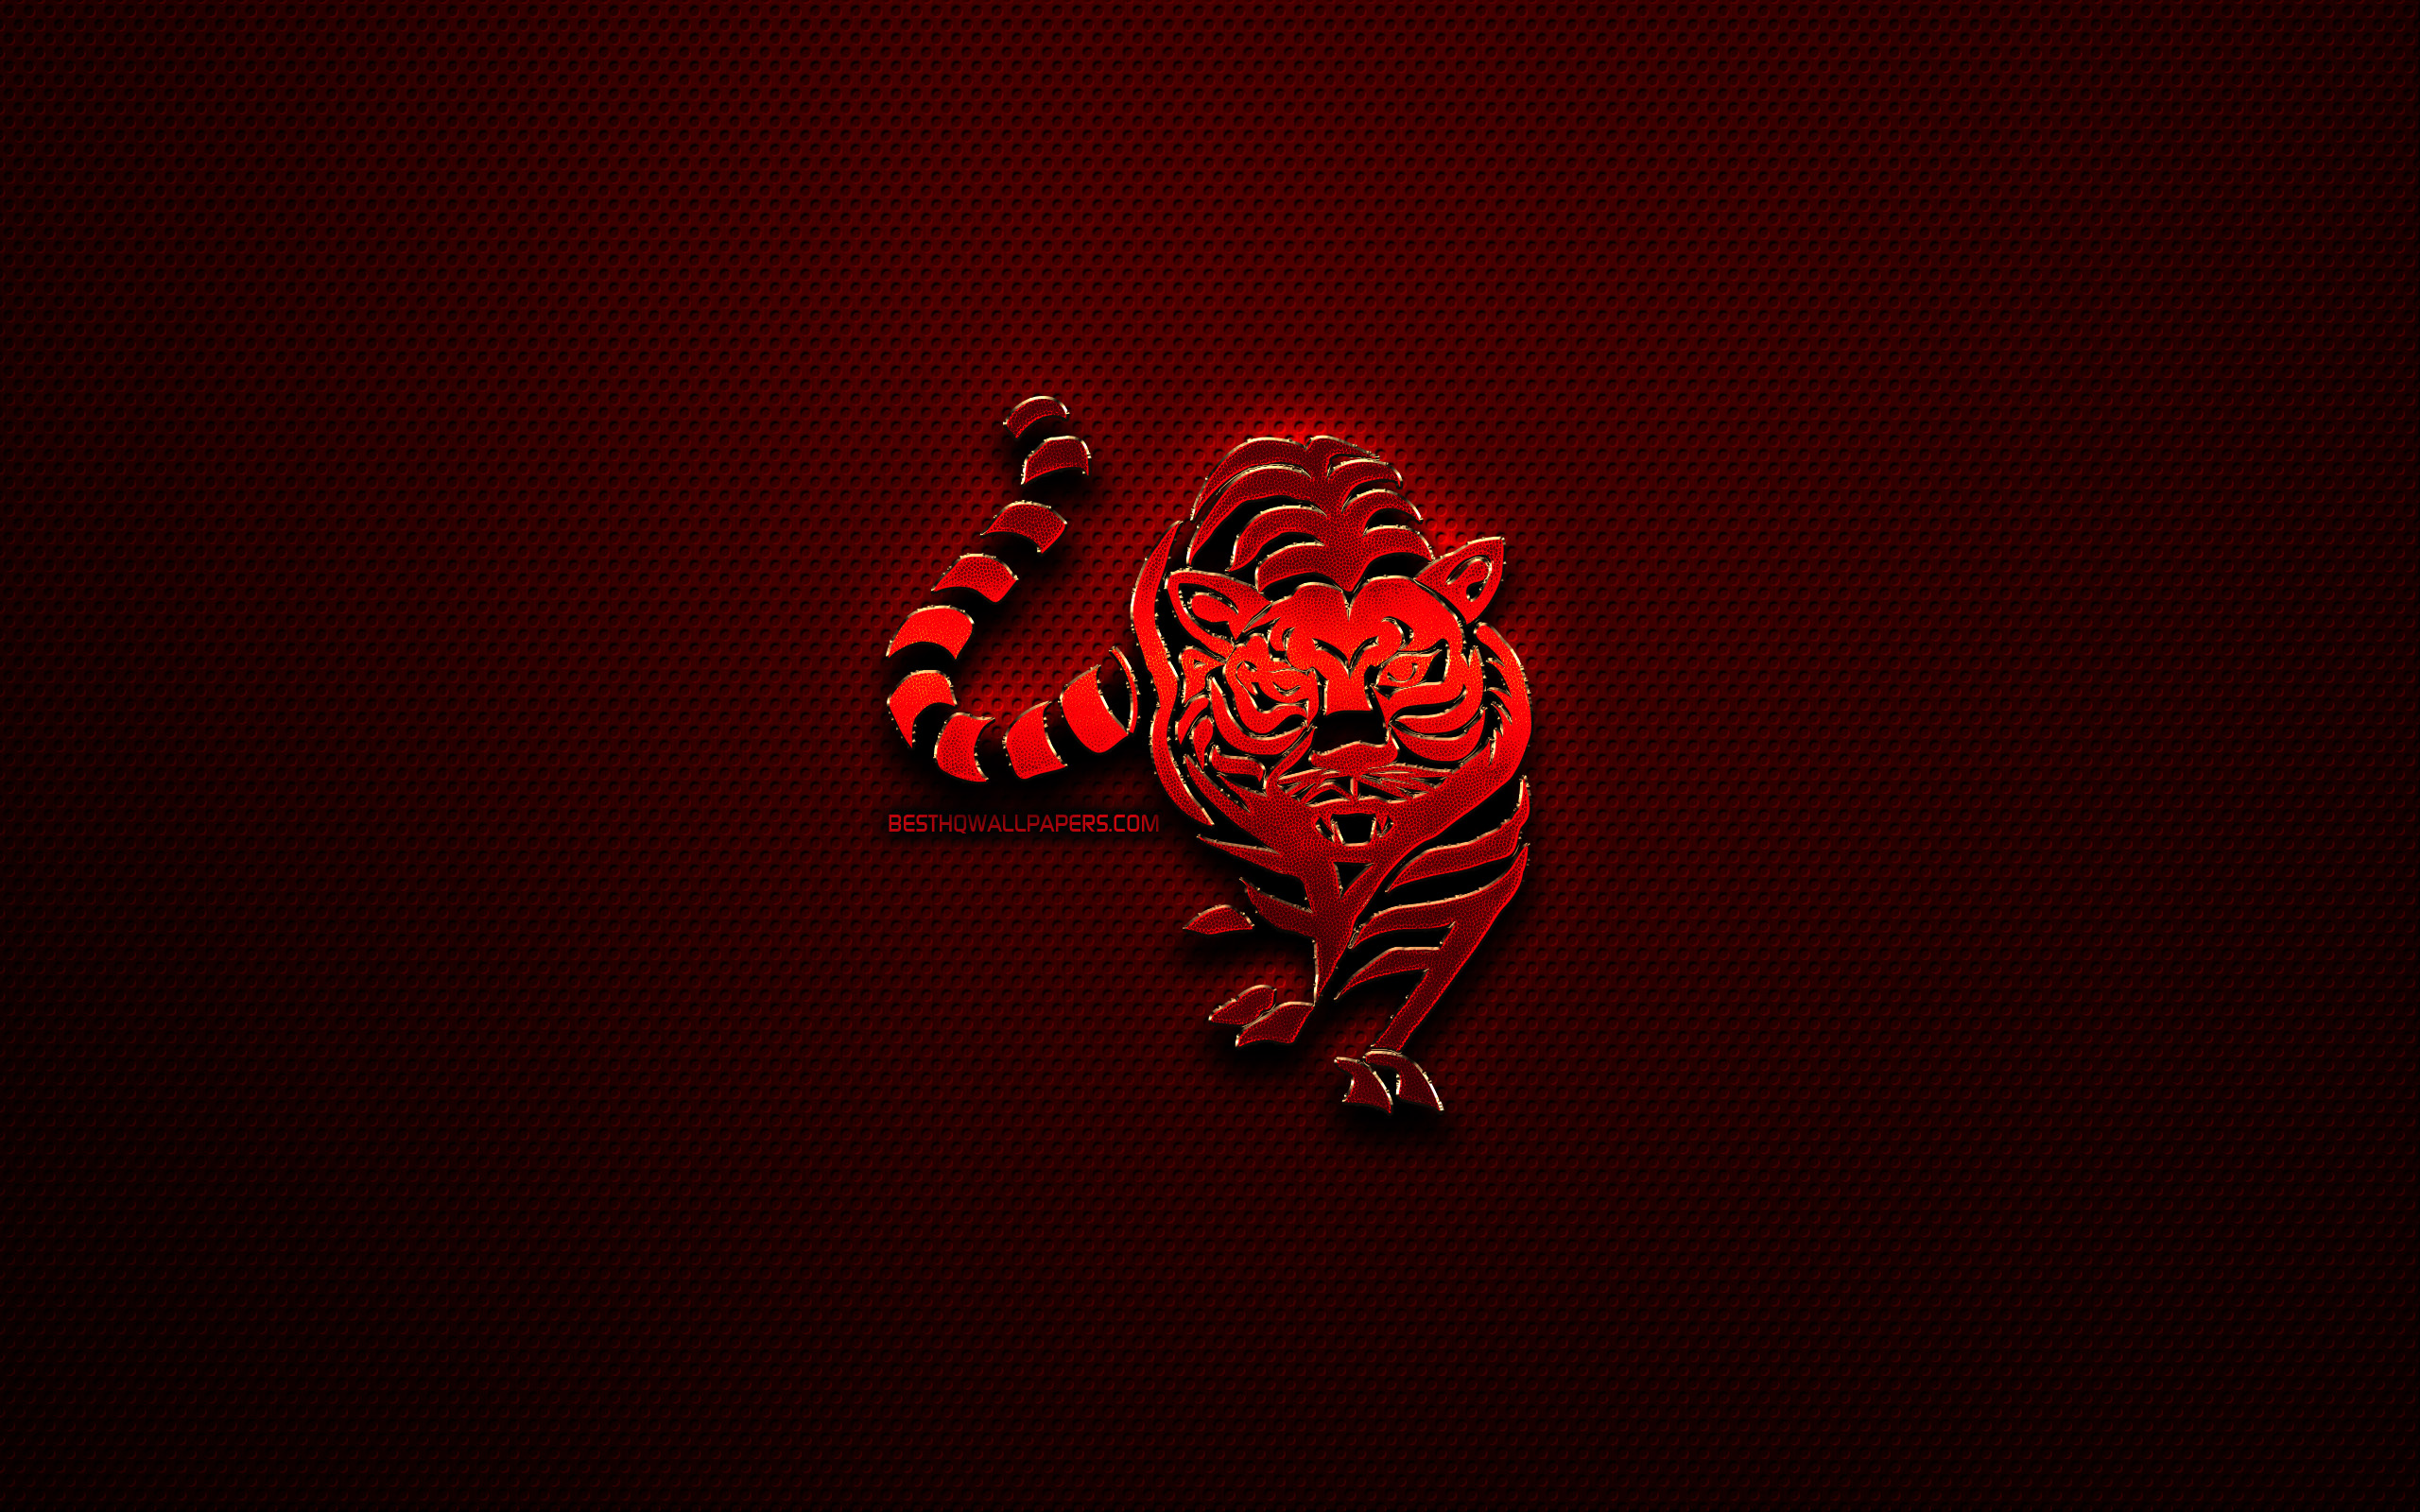 Download wallpaper Tiger zodiac, creative, chinese zodiac metal signs, Chinese calendar, Tiger zodiac sign, chinese zodiac, animals signs, red metal grid background, Chinese Zodiac Signs, artwork, Tiger for desktop with resolution 2560x1600